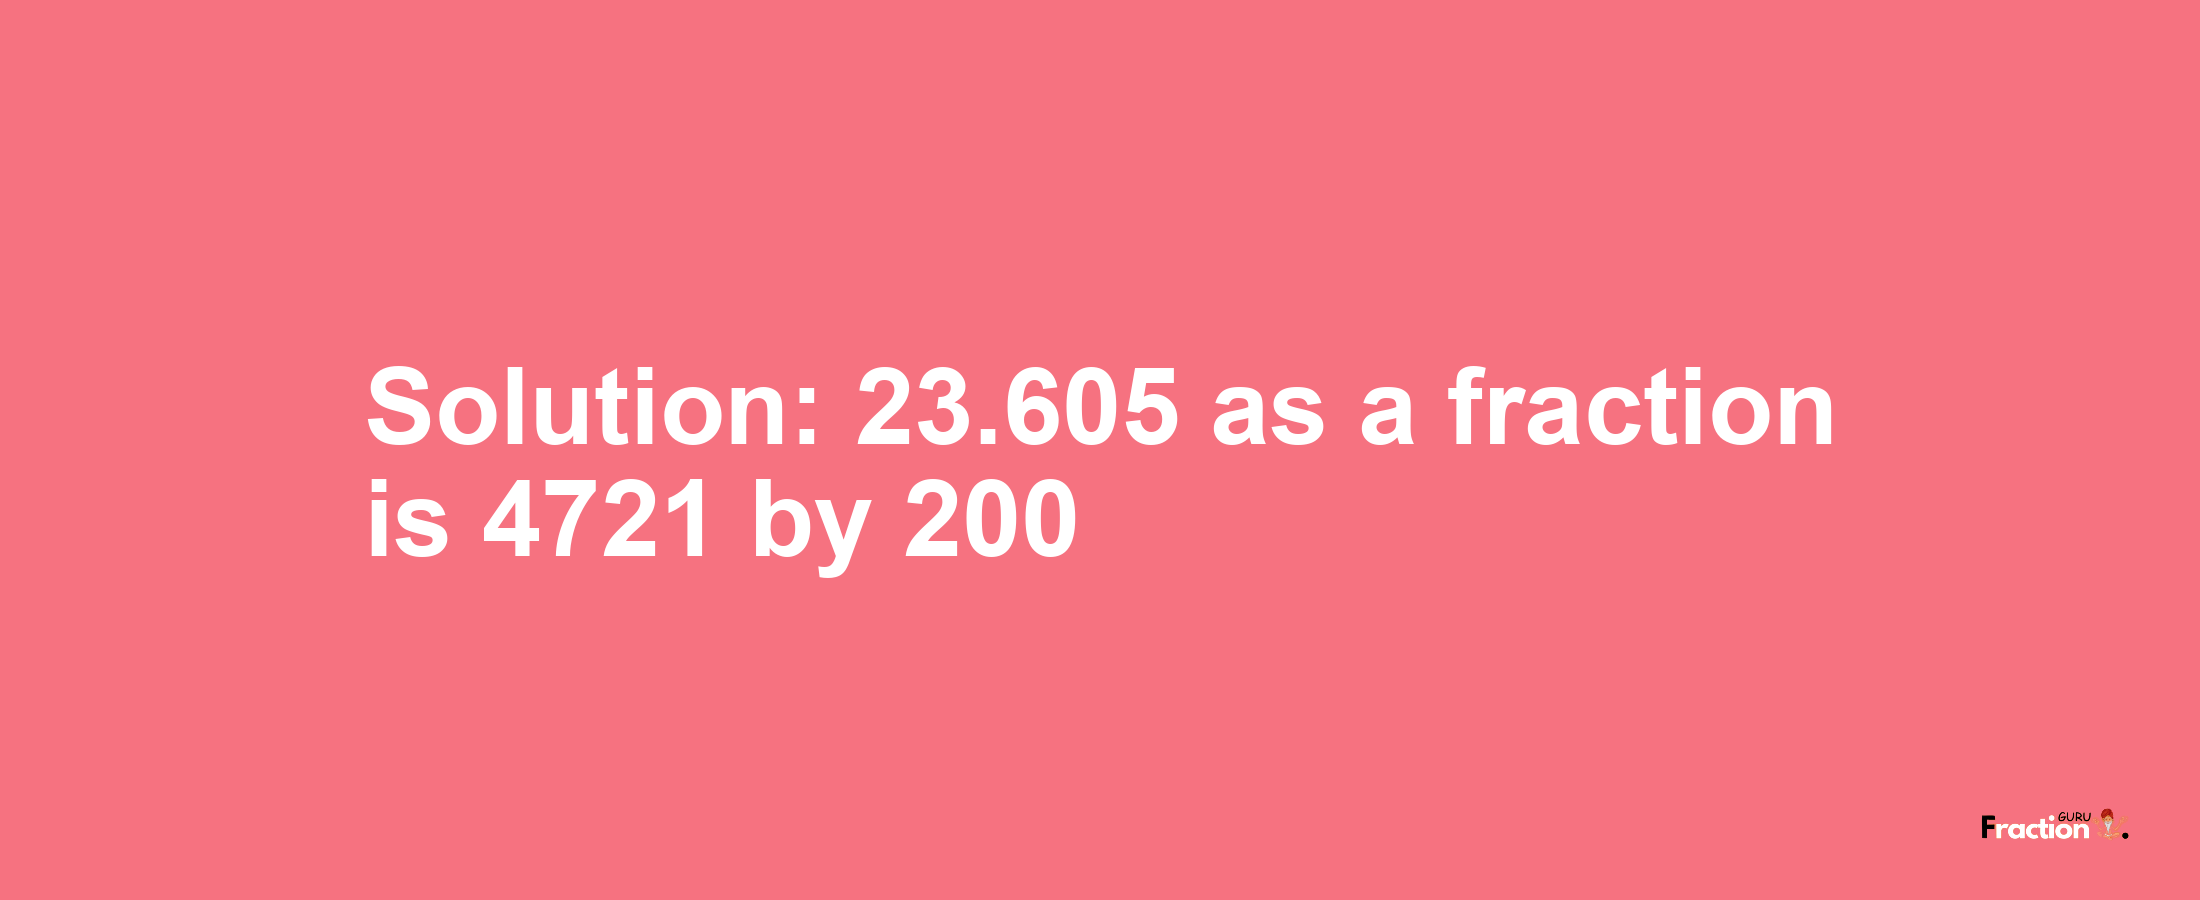 Solution:23.605 as a fraction is 4721/200